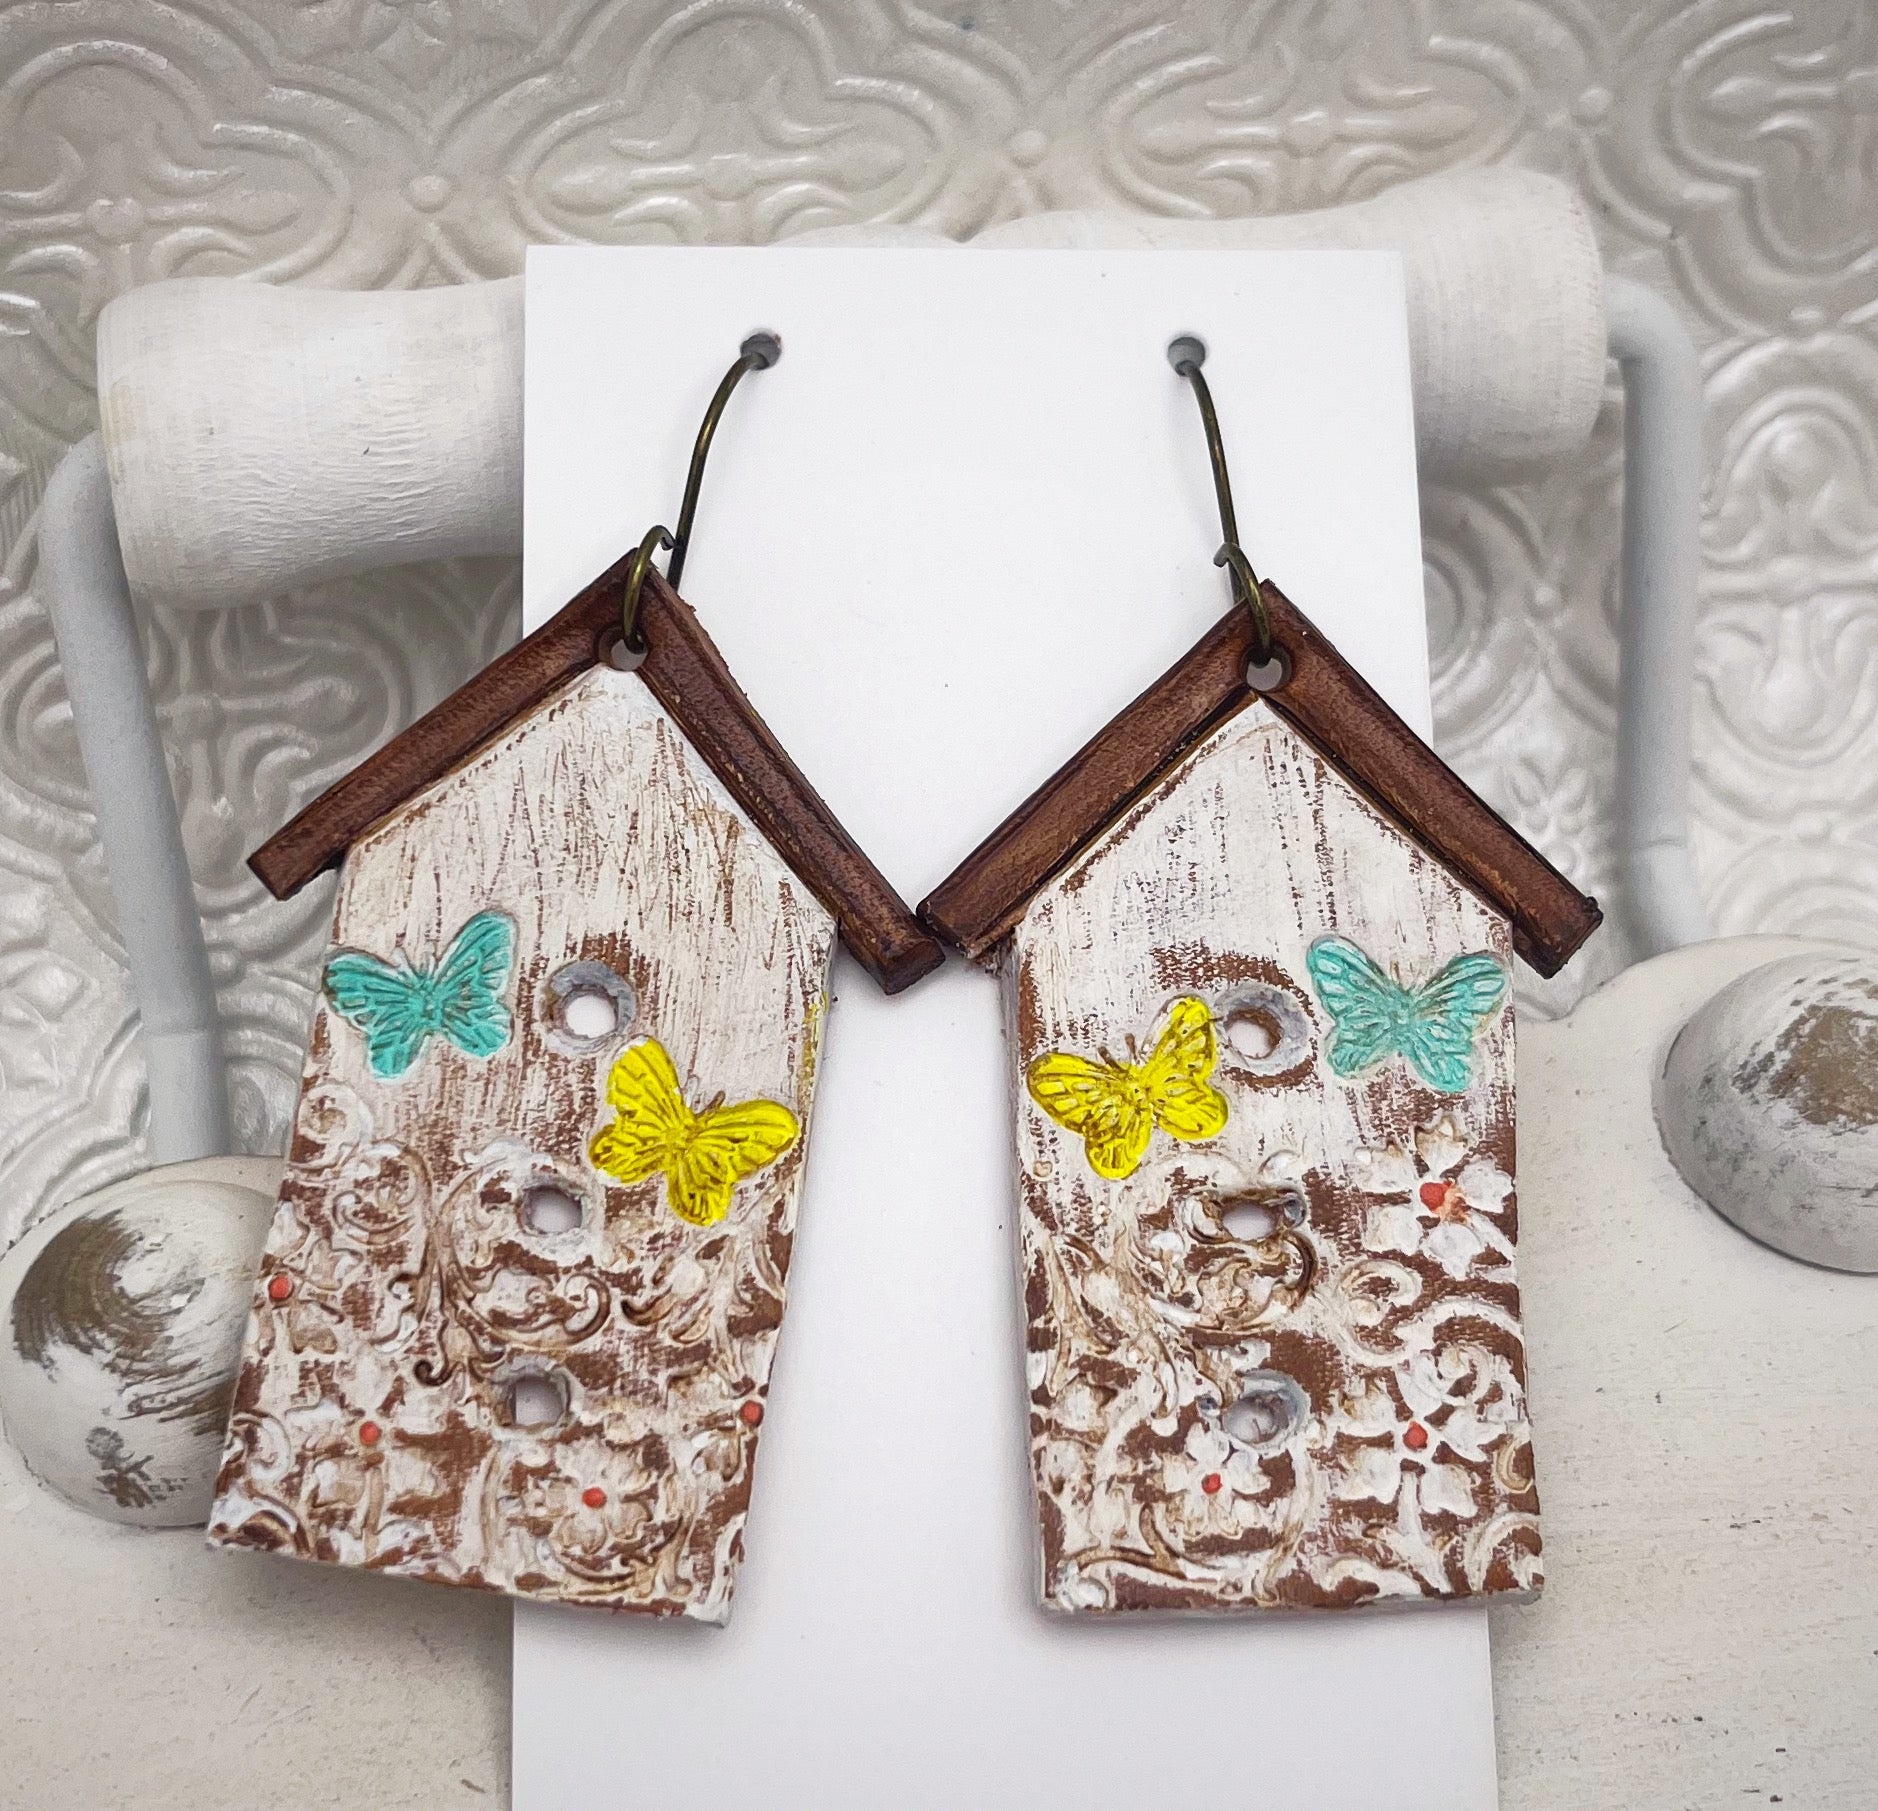 Tooled Leather Earrings - Rustic Birdhouse